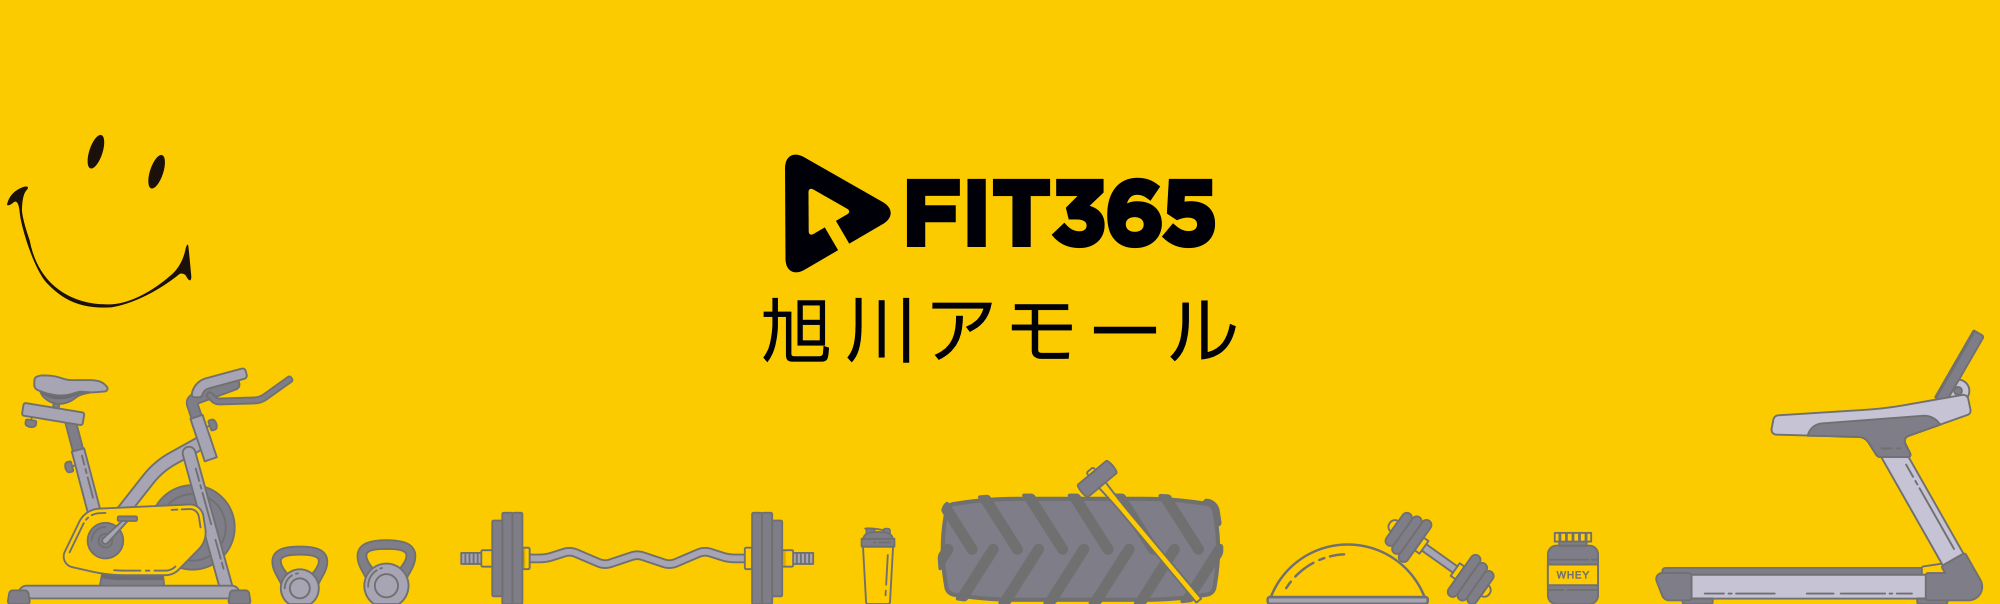 FIT365 旭川アモール